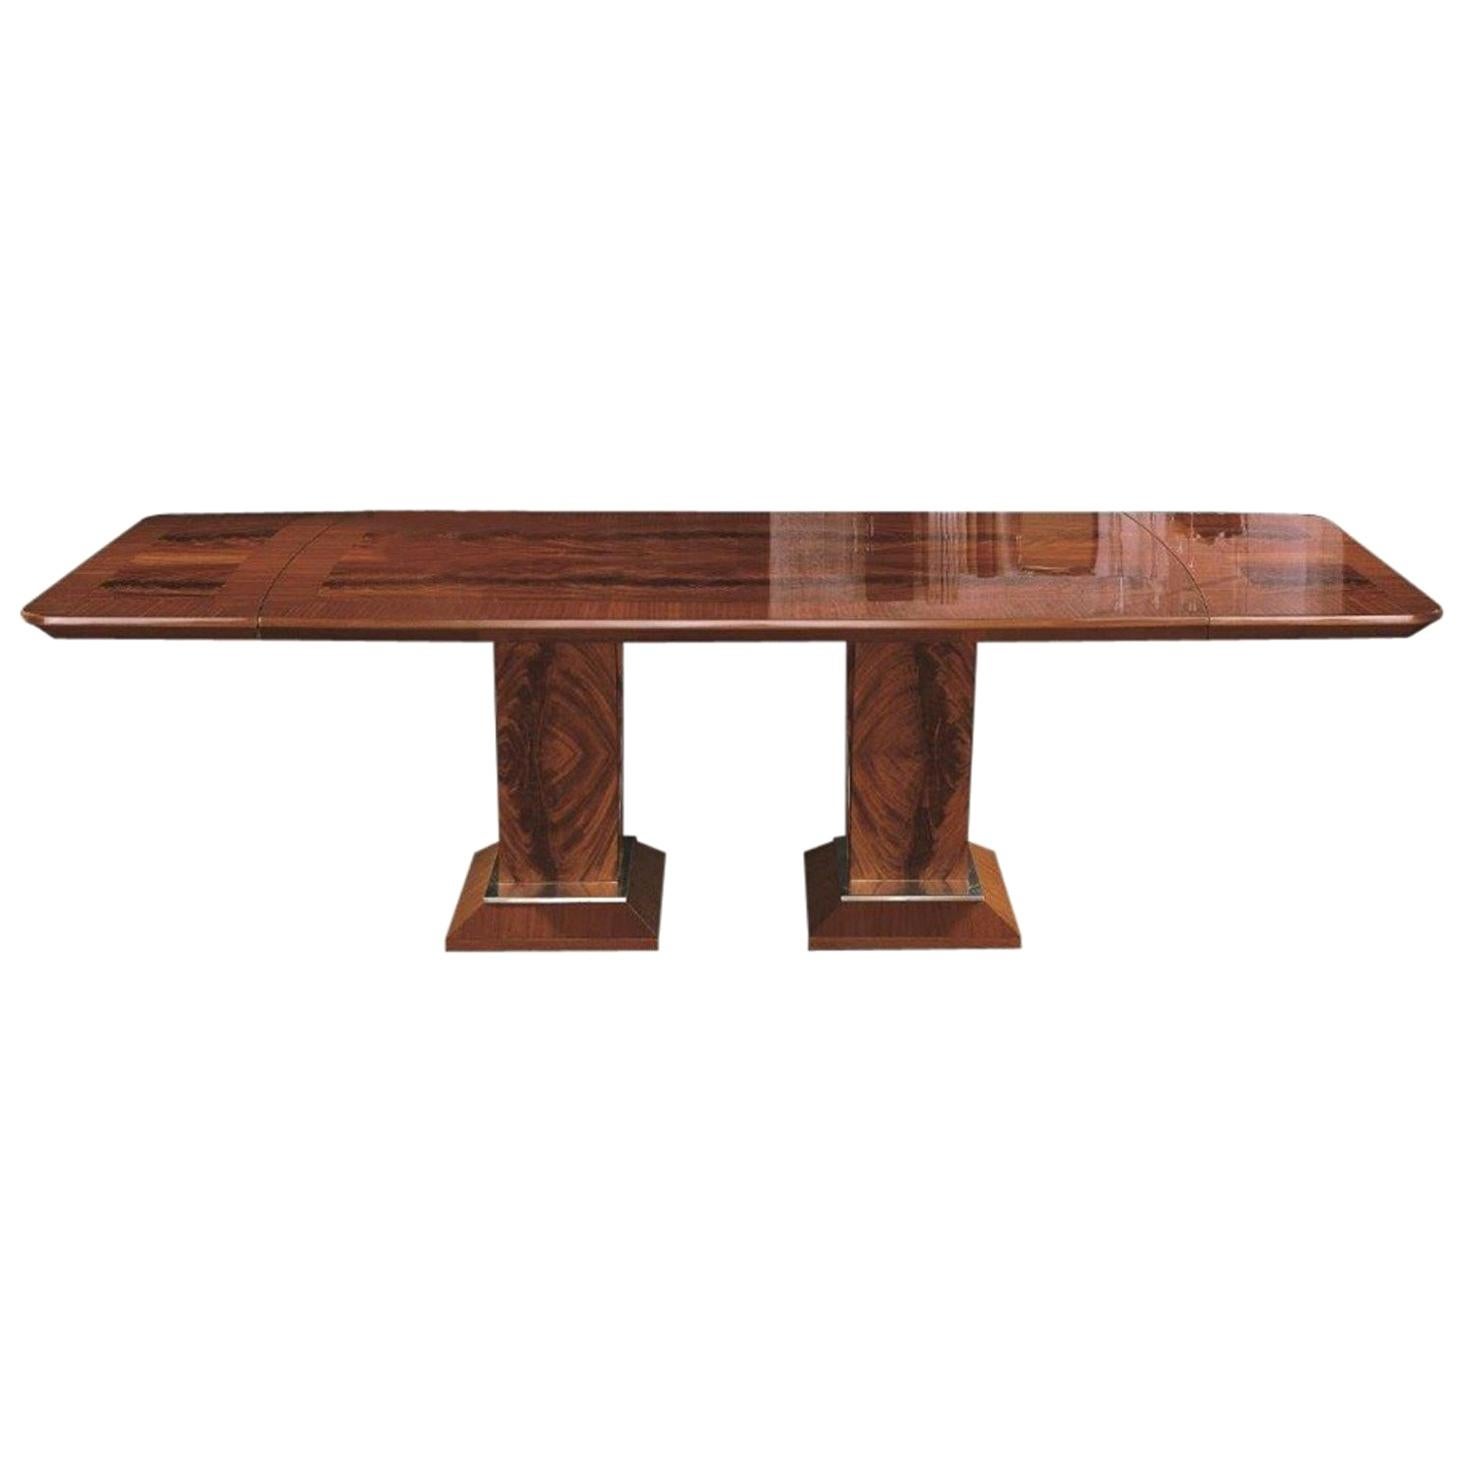 Giorgio Collection Rectangular Crotch and Sapele Mahogany Wood Dining Table For Sale